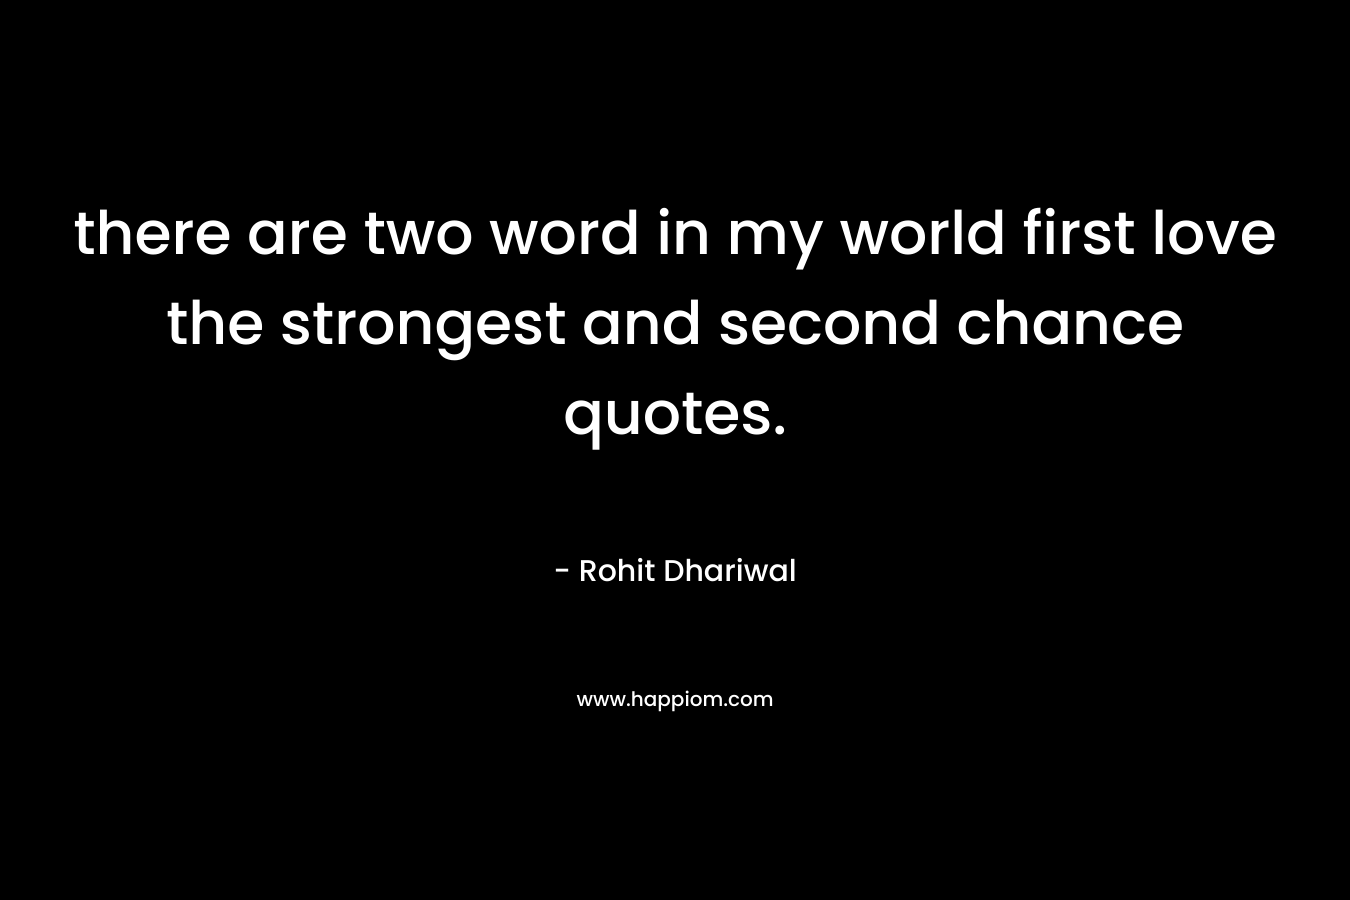 there are two word in my world first love the strongest and second chance quotes. – Rohit Dhariwal